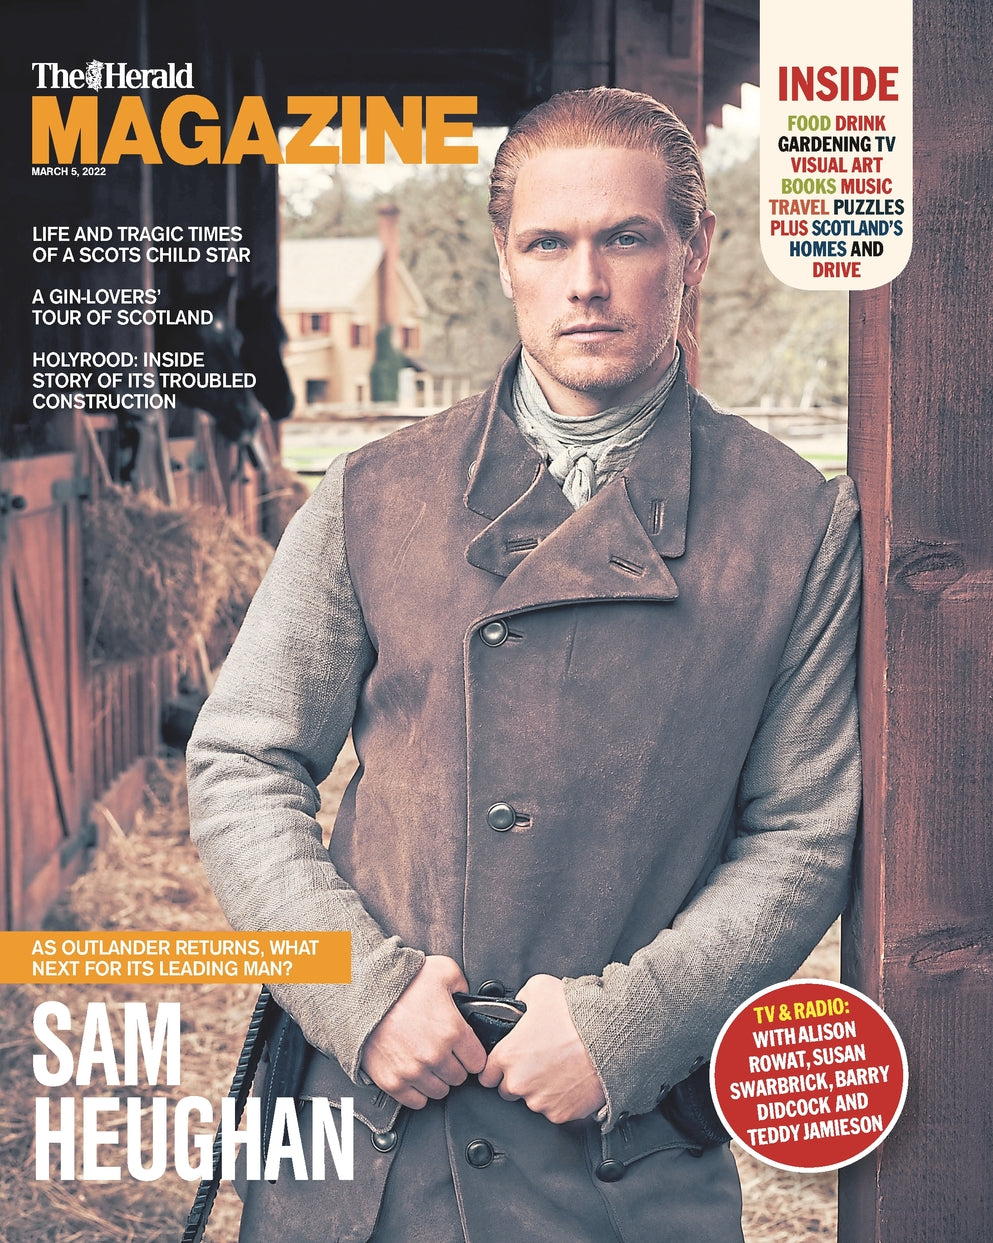 HERALD SCOTLAND magazine March 2022 Sam Heughan cover and interview Outlander